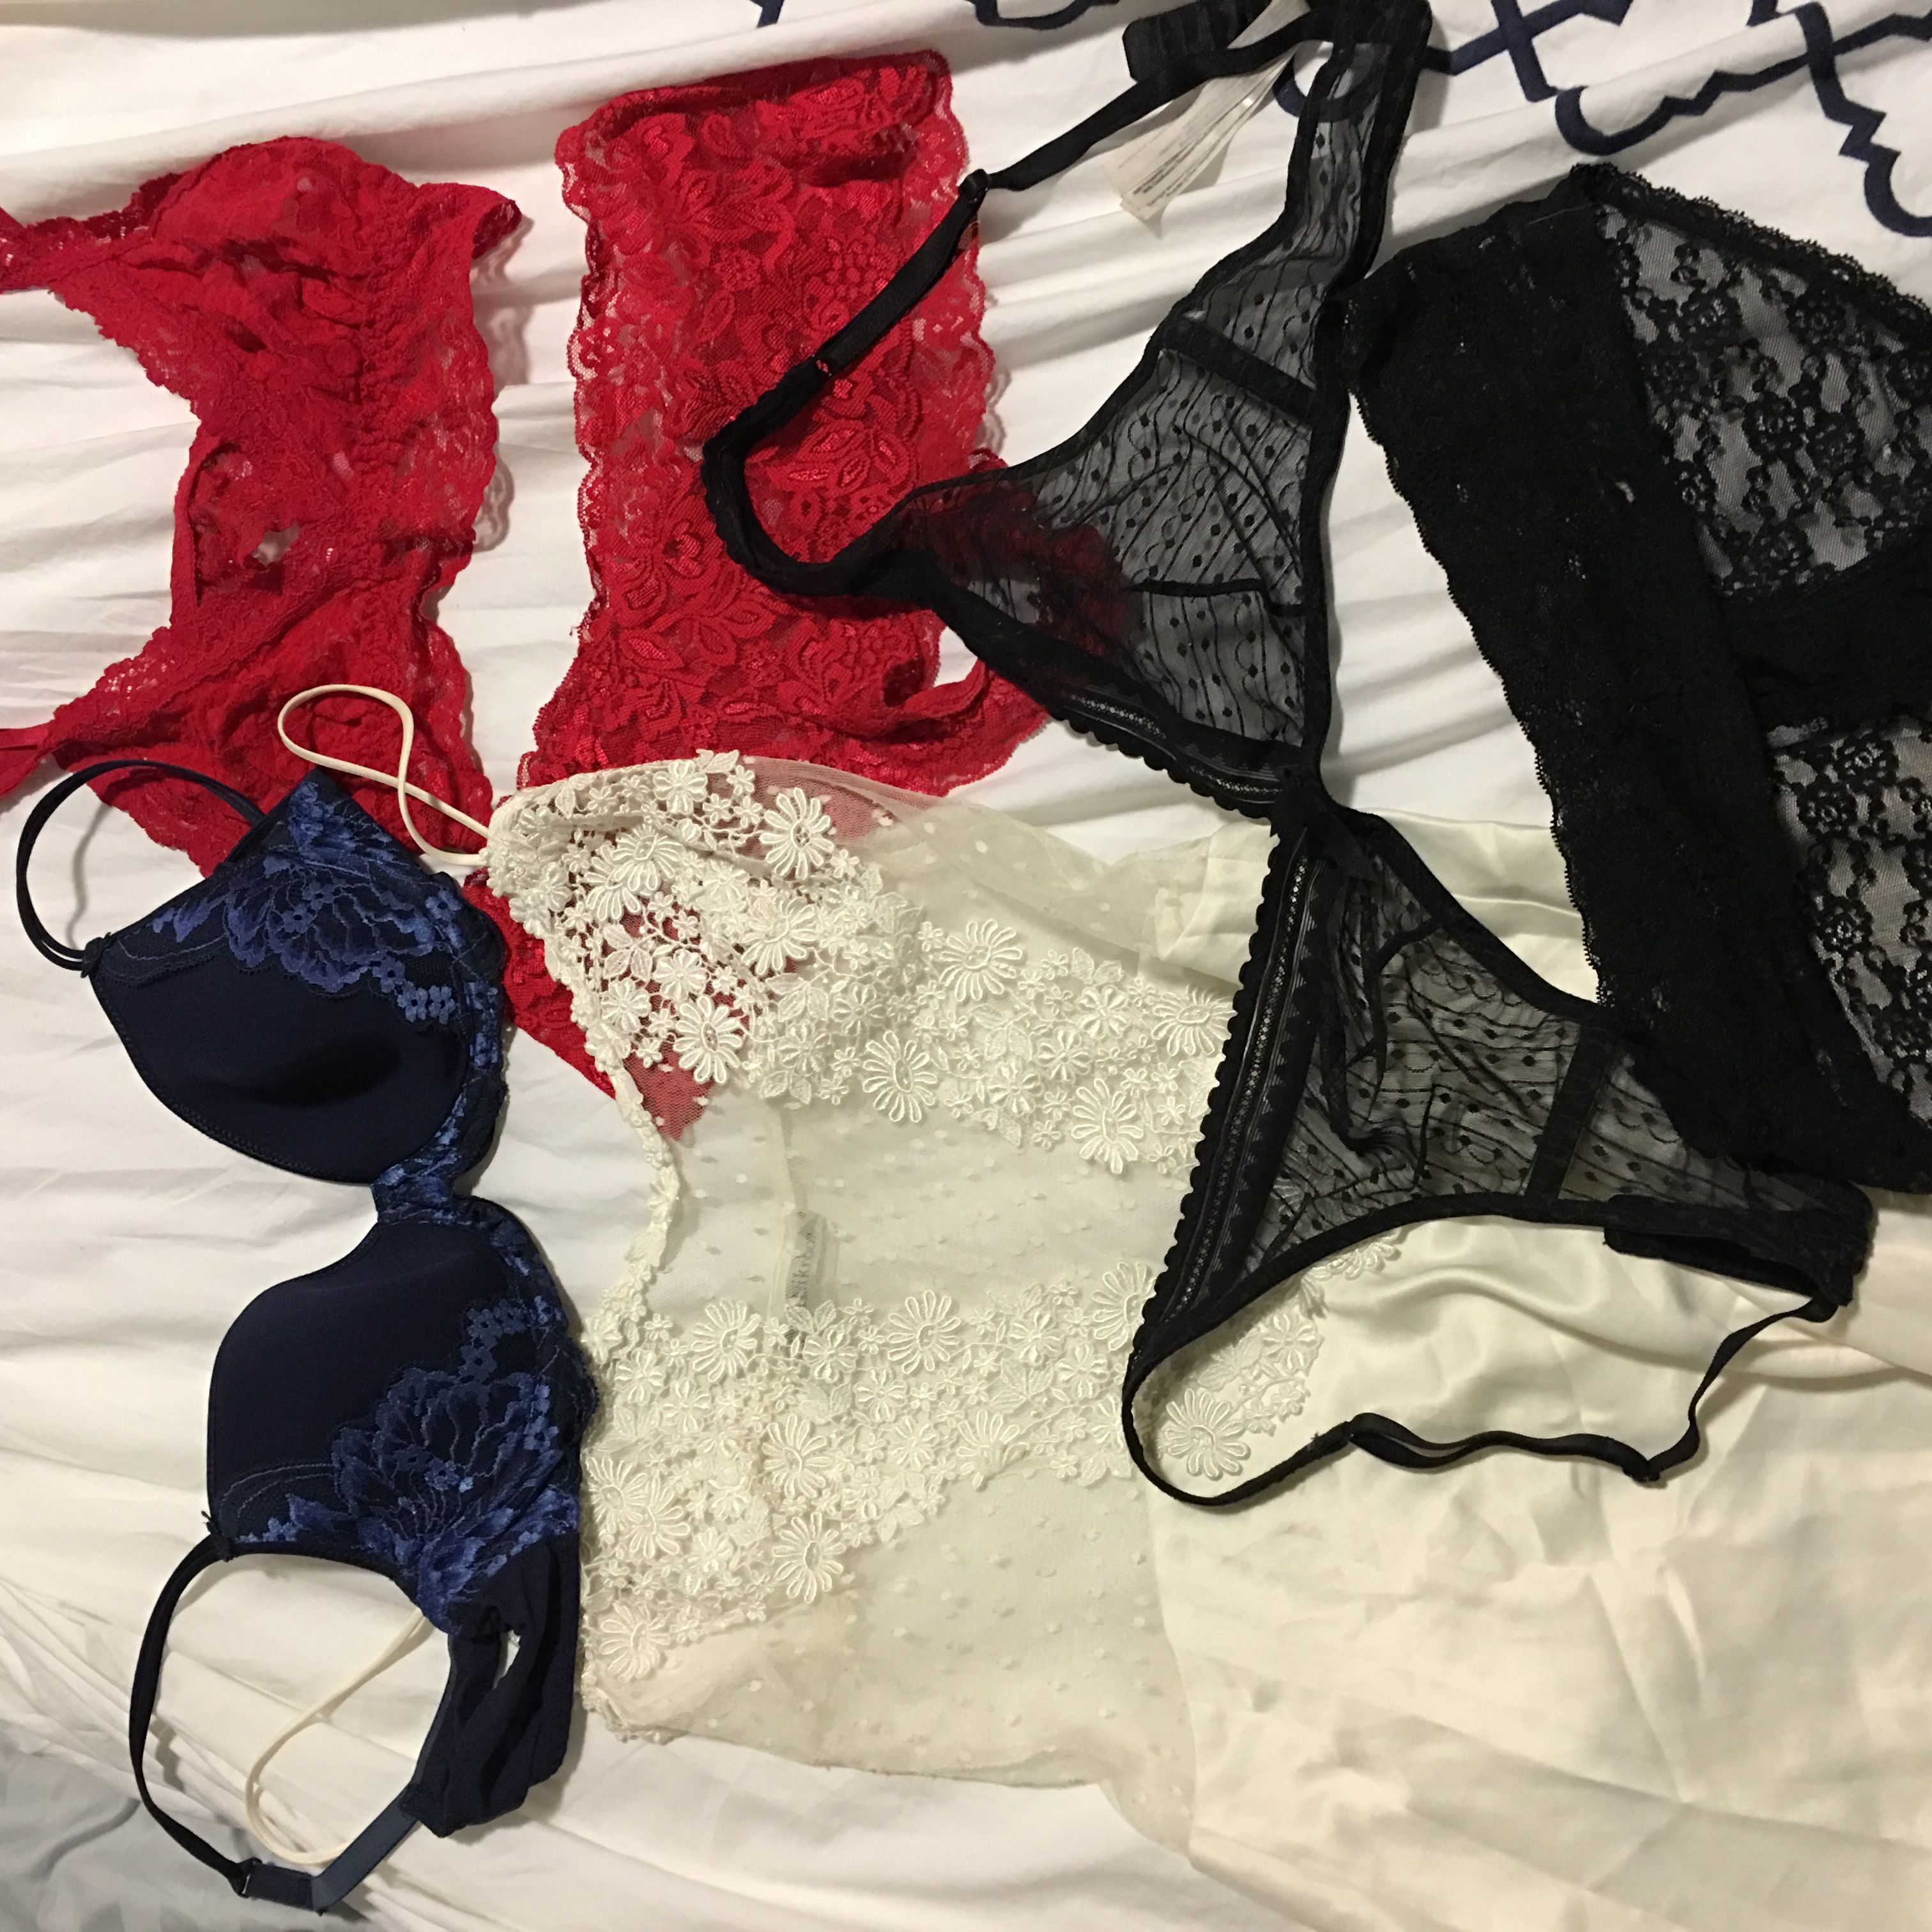 Why I Began My New Marriage With a Trip to a French Lingerie Store photo photo